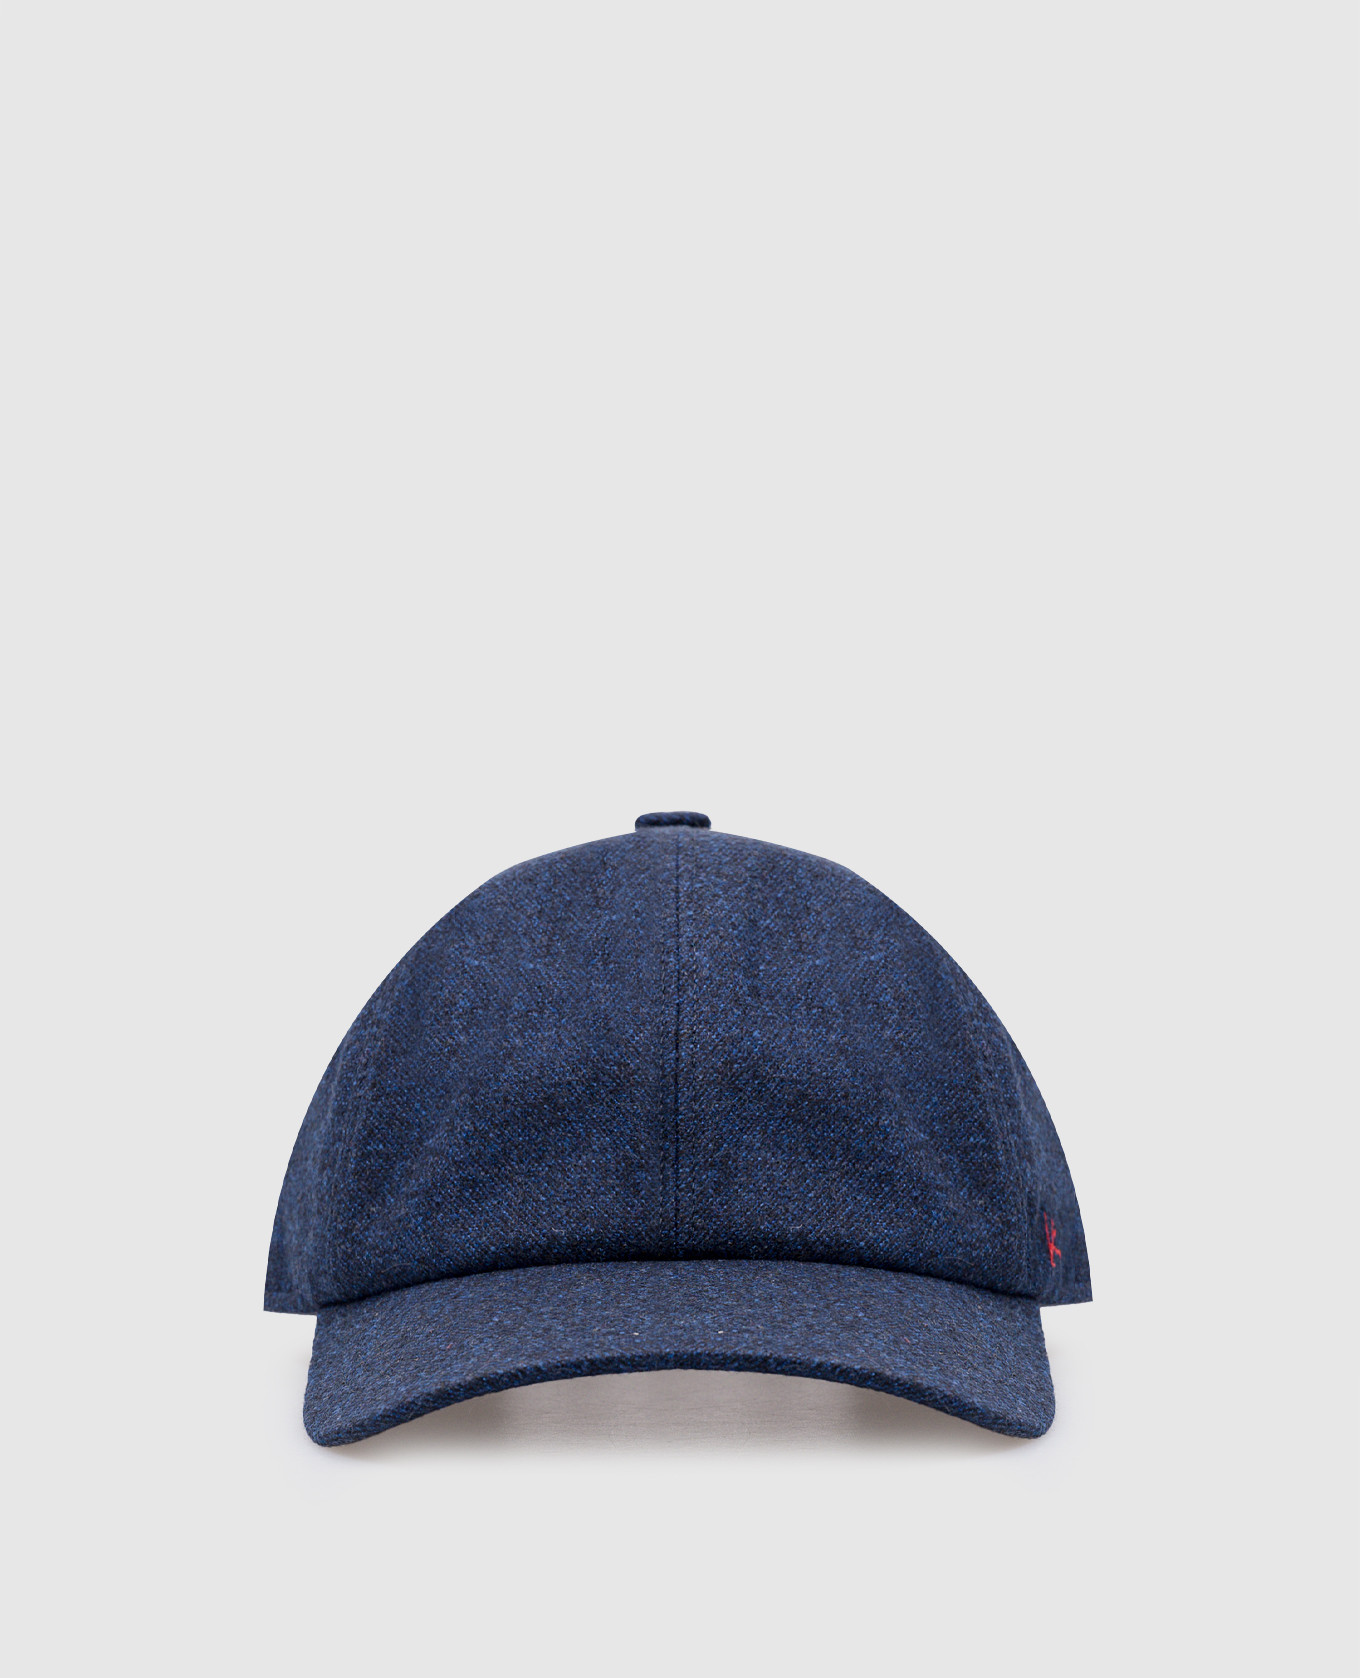 Blue wool cap with logo embroidery